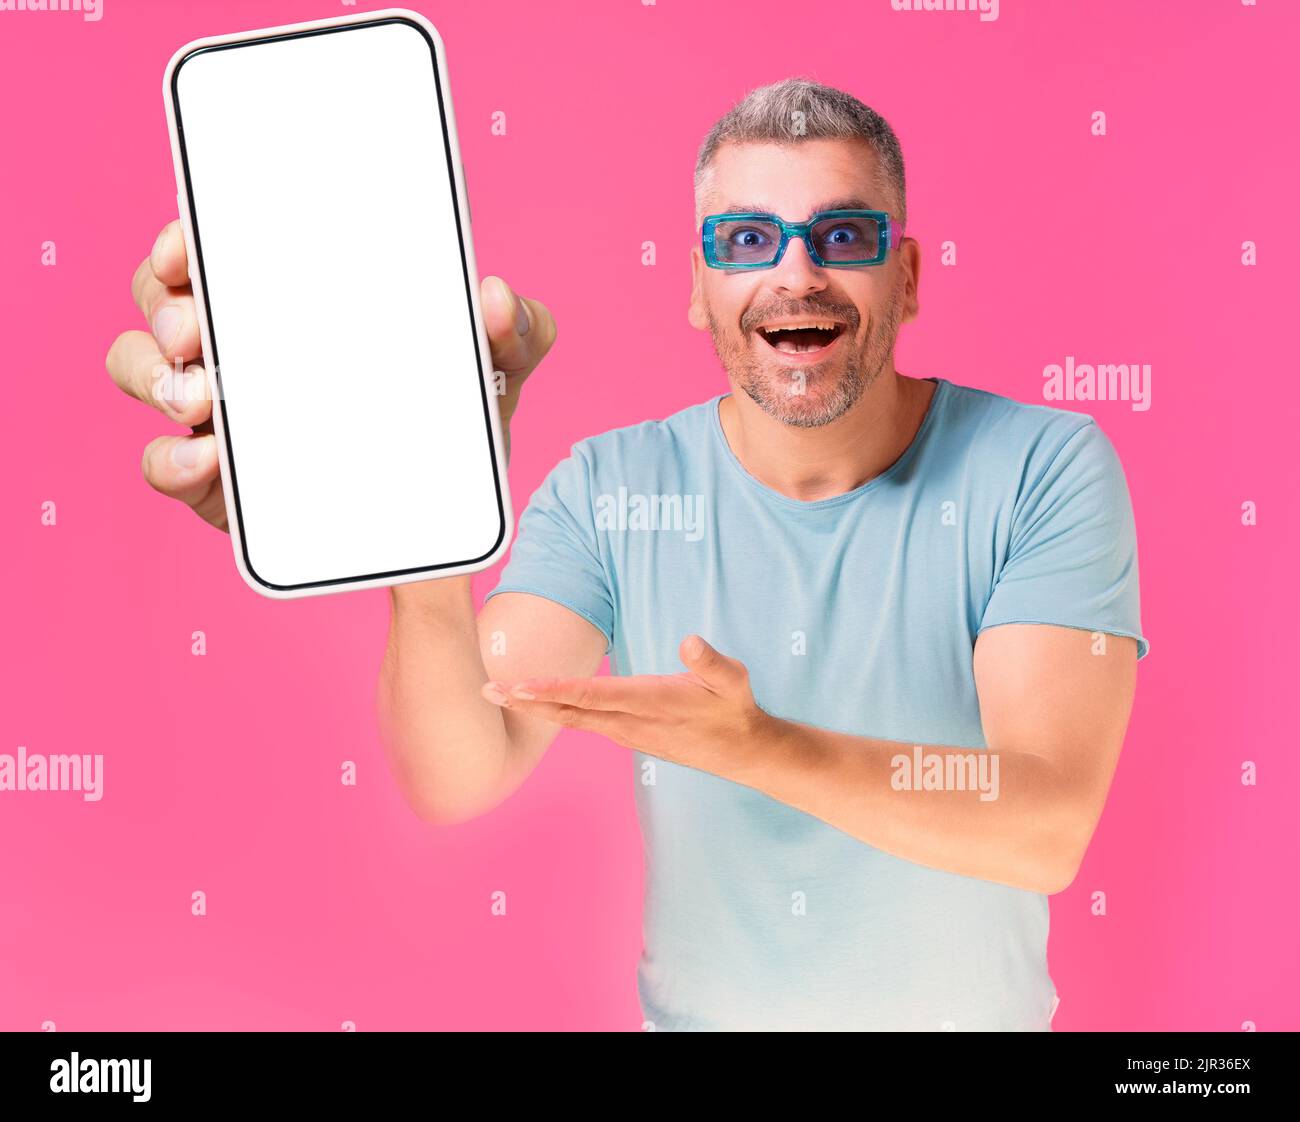 Happy excited middle aged handsome man 40s with big smartphone in hand wearing blue shirt and sunglasses isolated on pink background. Mobile app advertisement.  Stock Photo